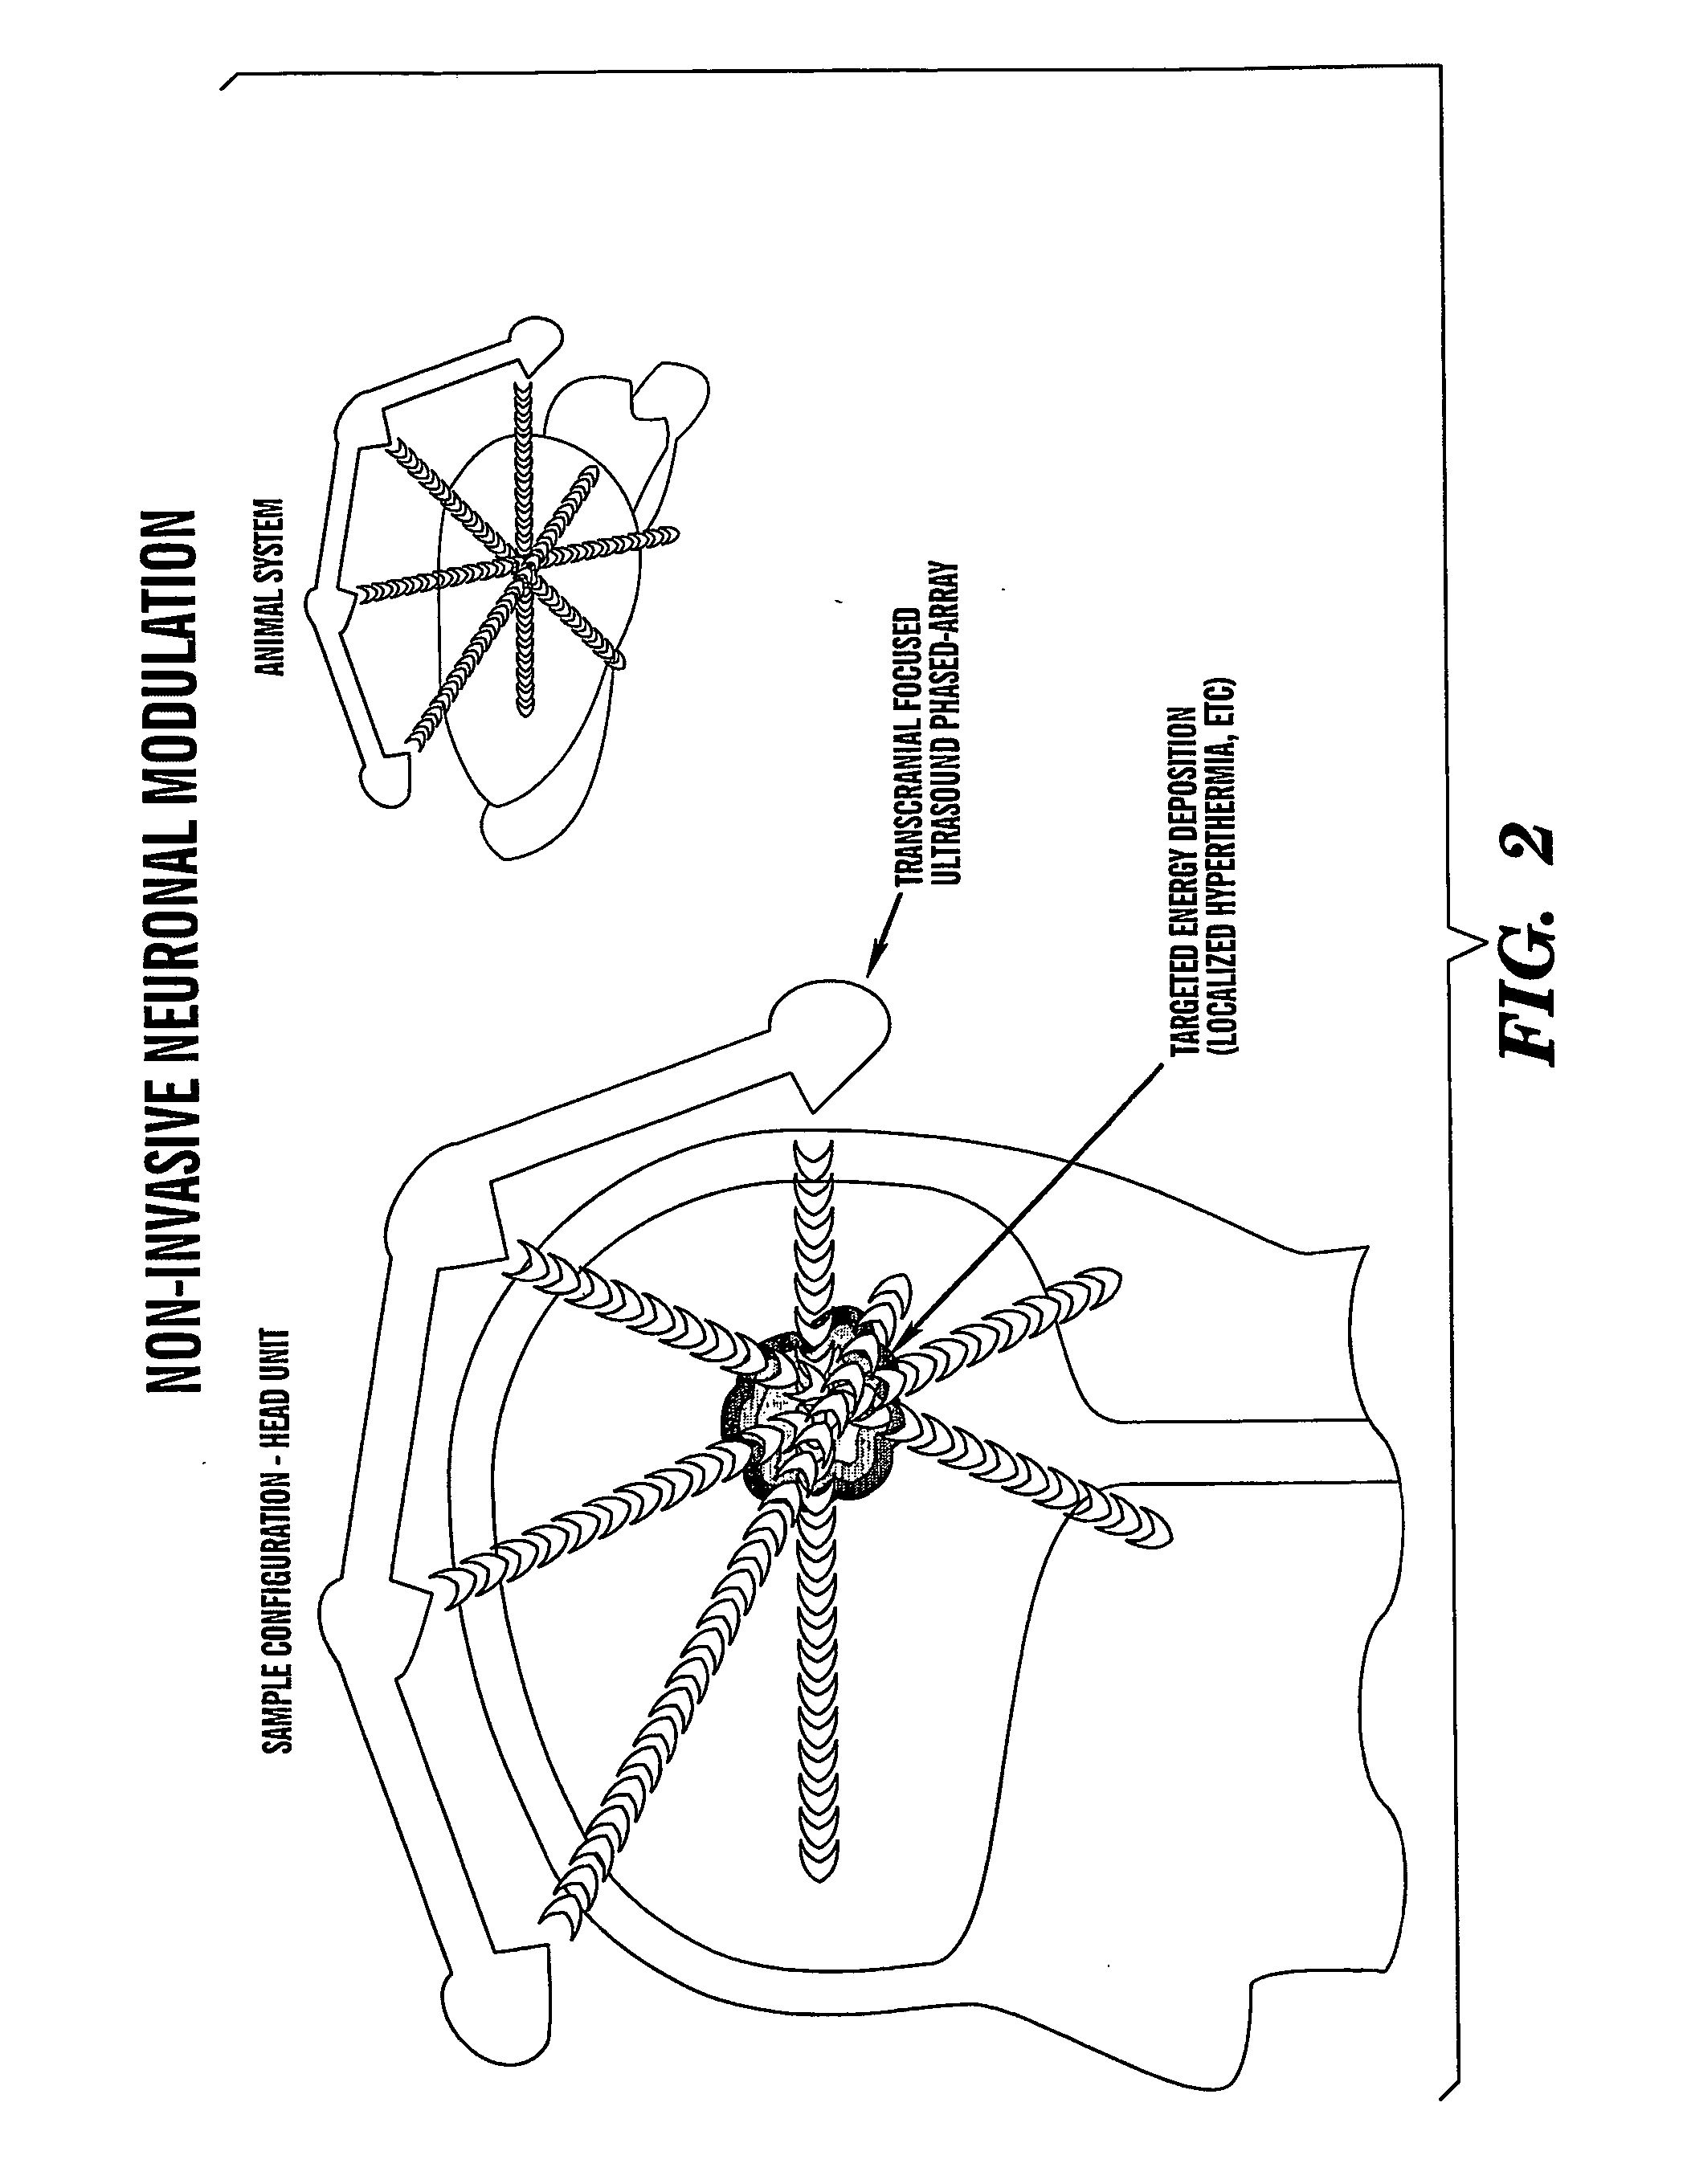 Localized non-invasive biological modulation system